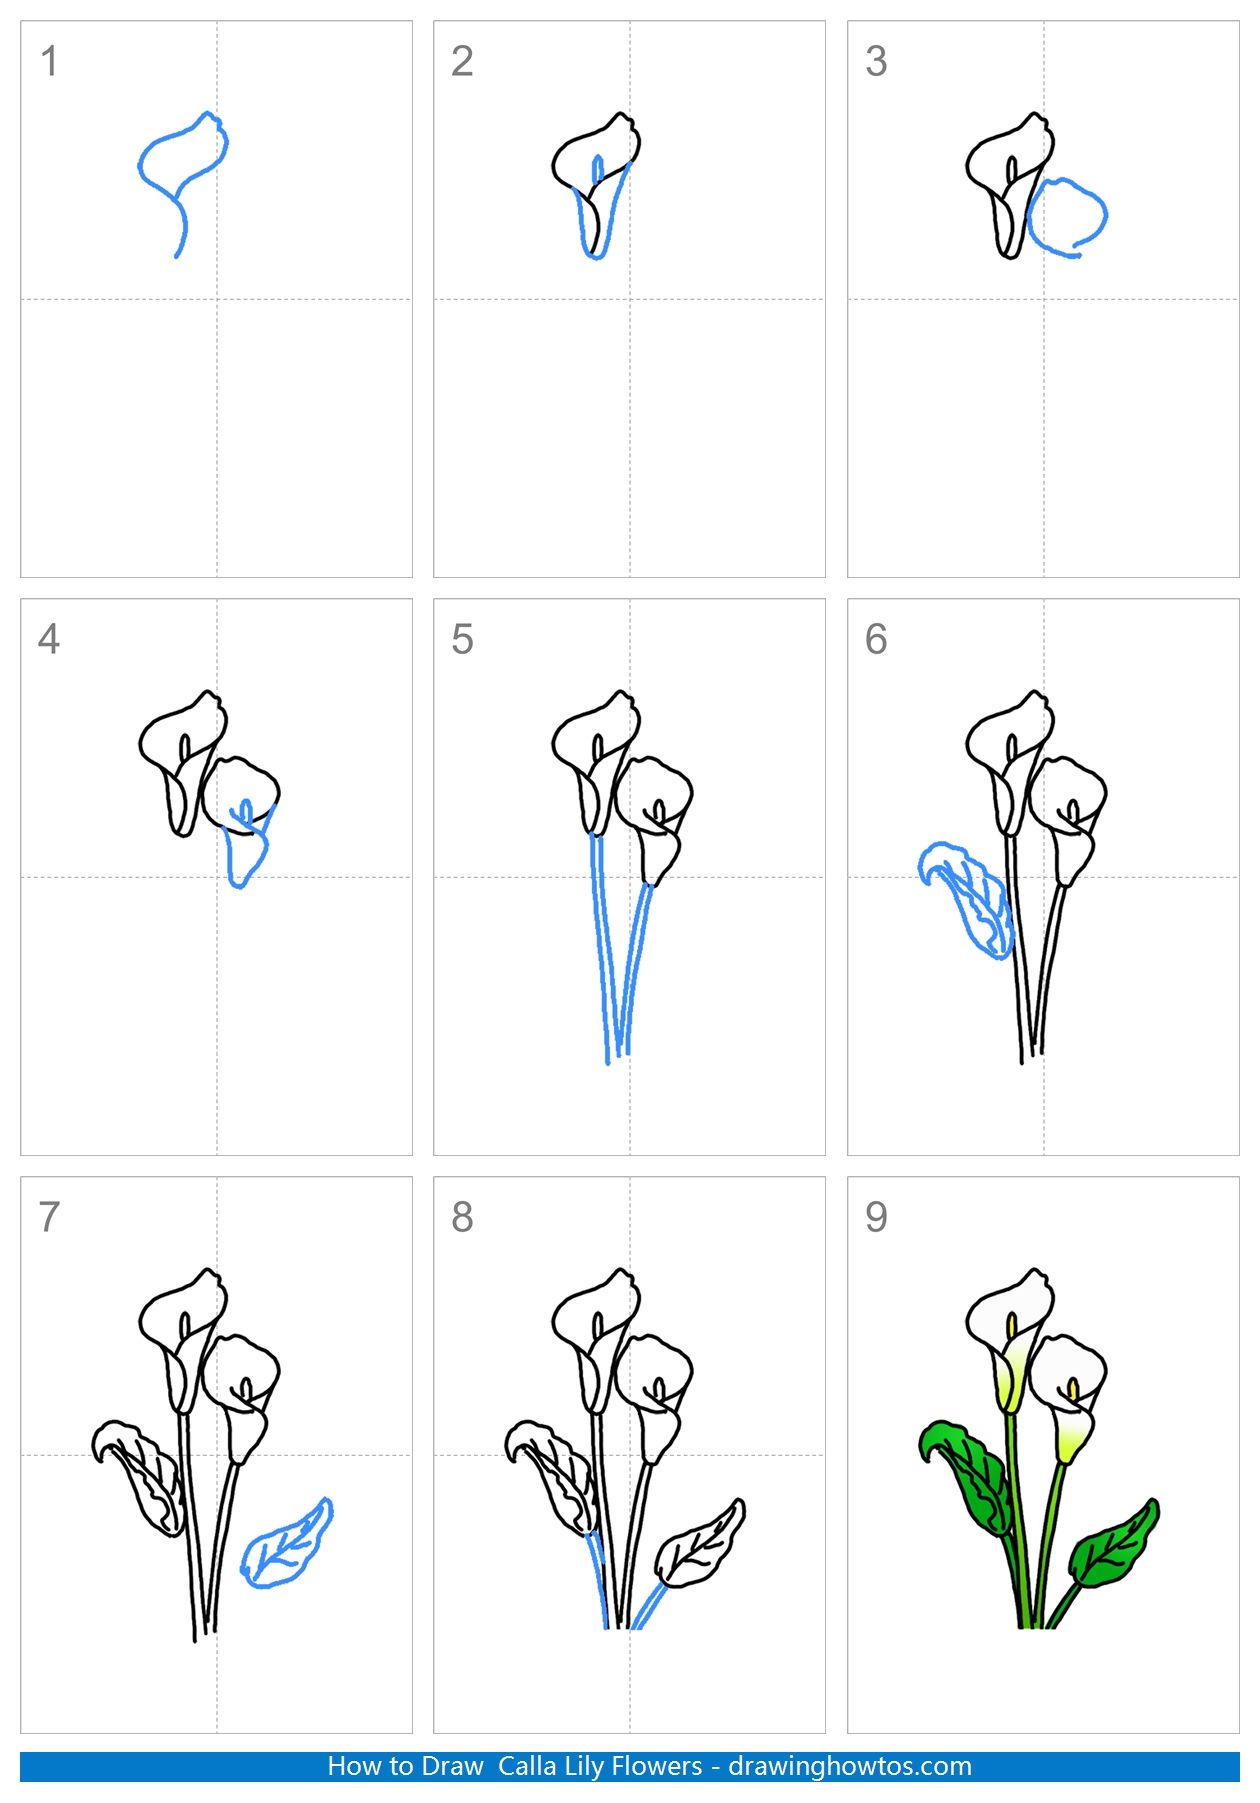 How to Draw Calla Lily Flowers Step by Step Easy Drawing Guides